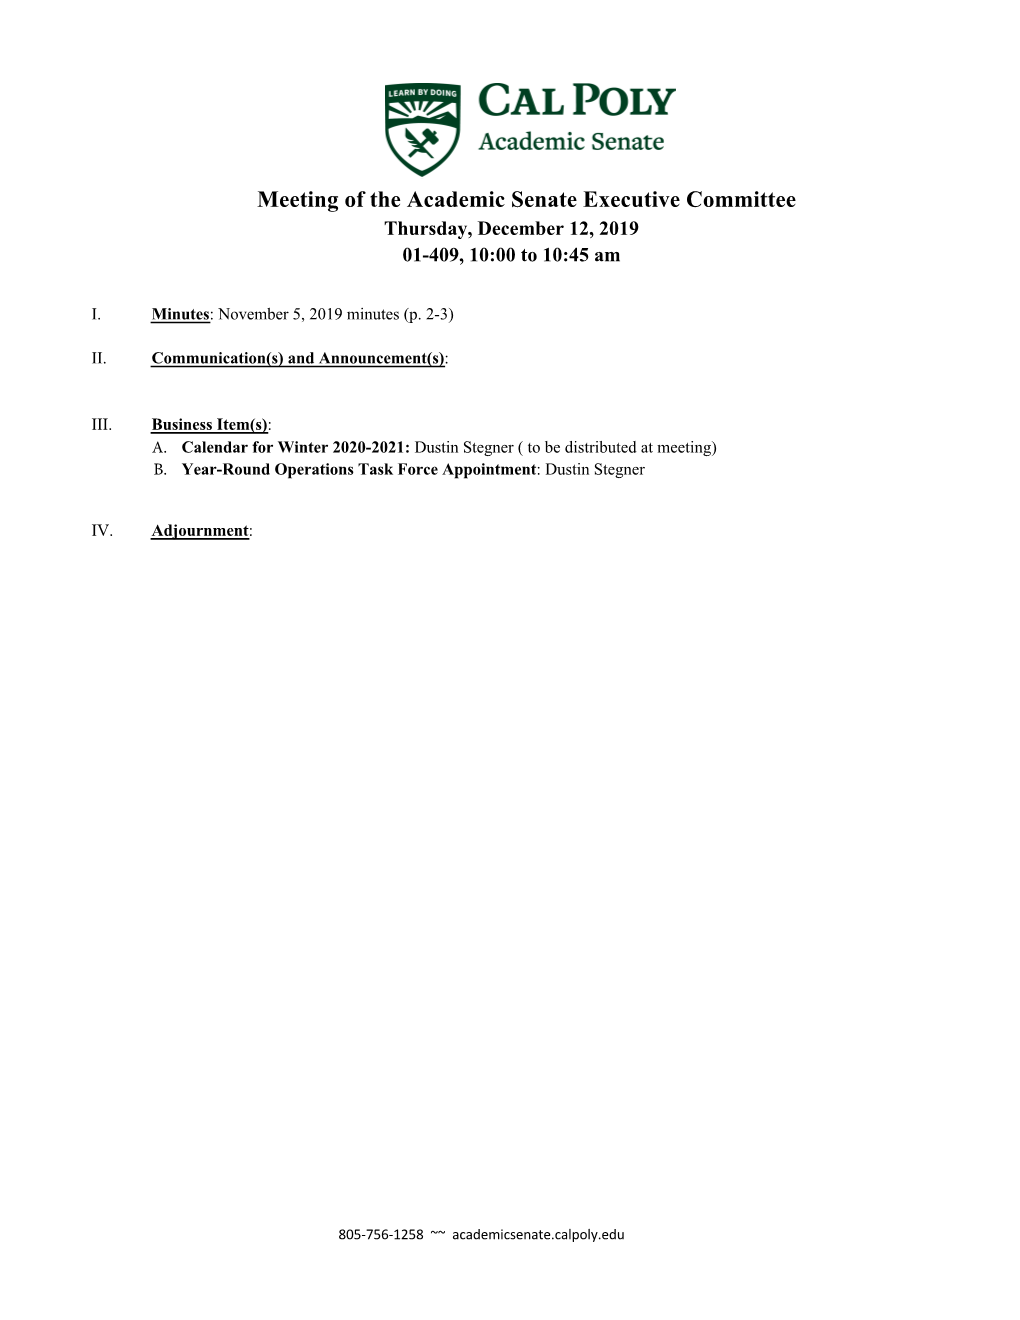 Executive Committee Thursday, December 12, 2019 01-409, 10:00 to 10:45 Am